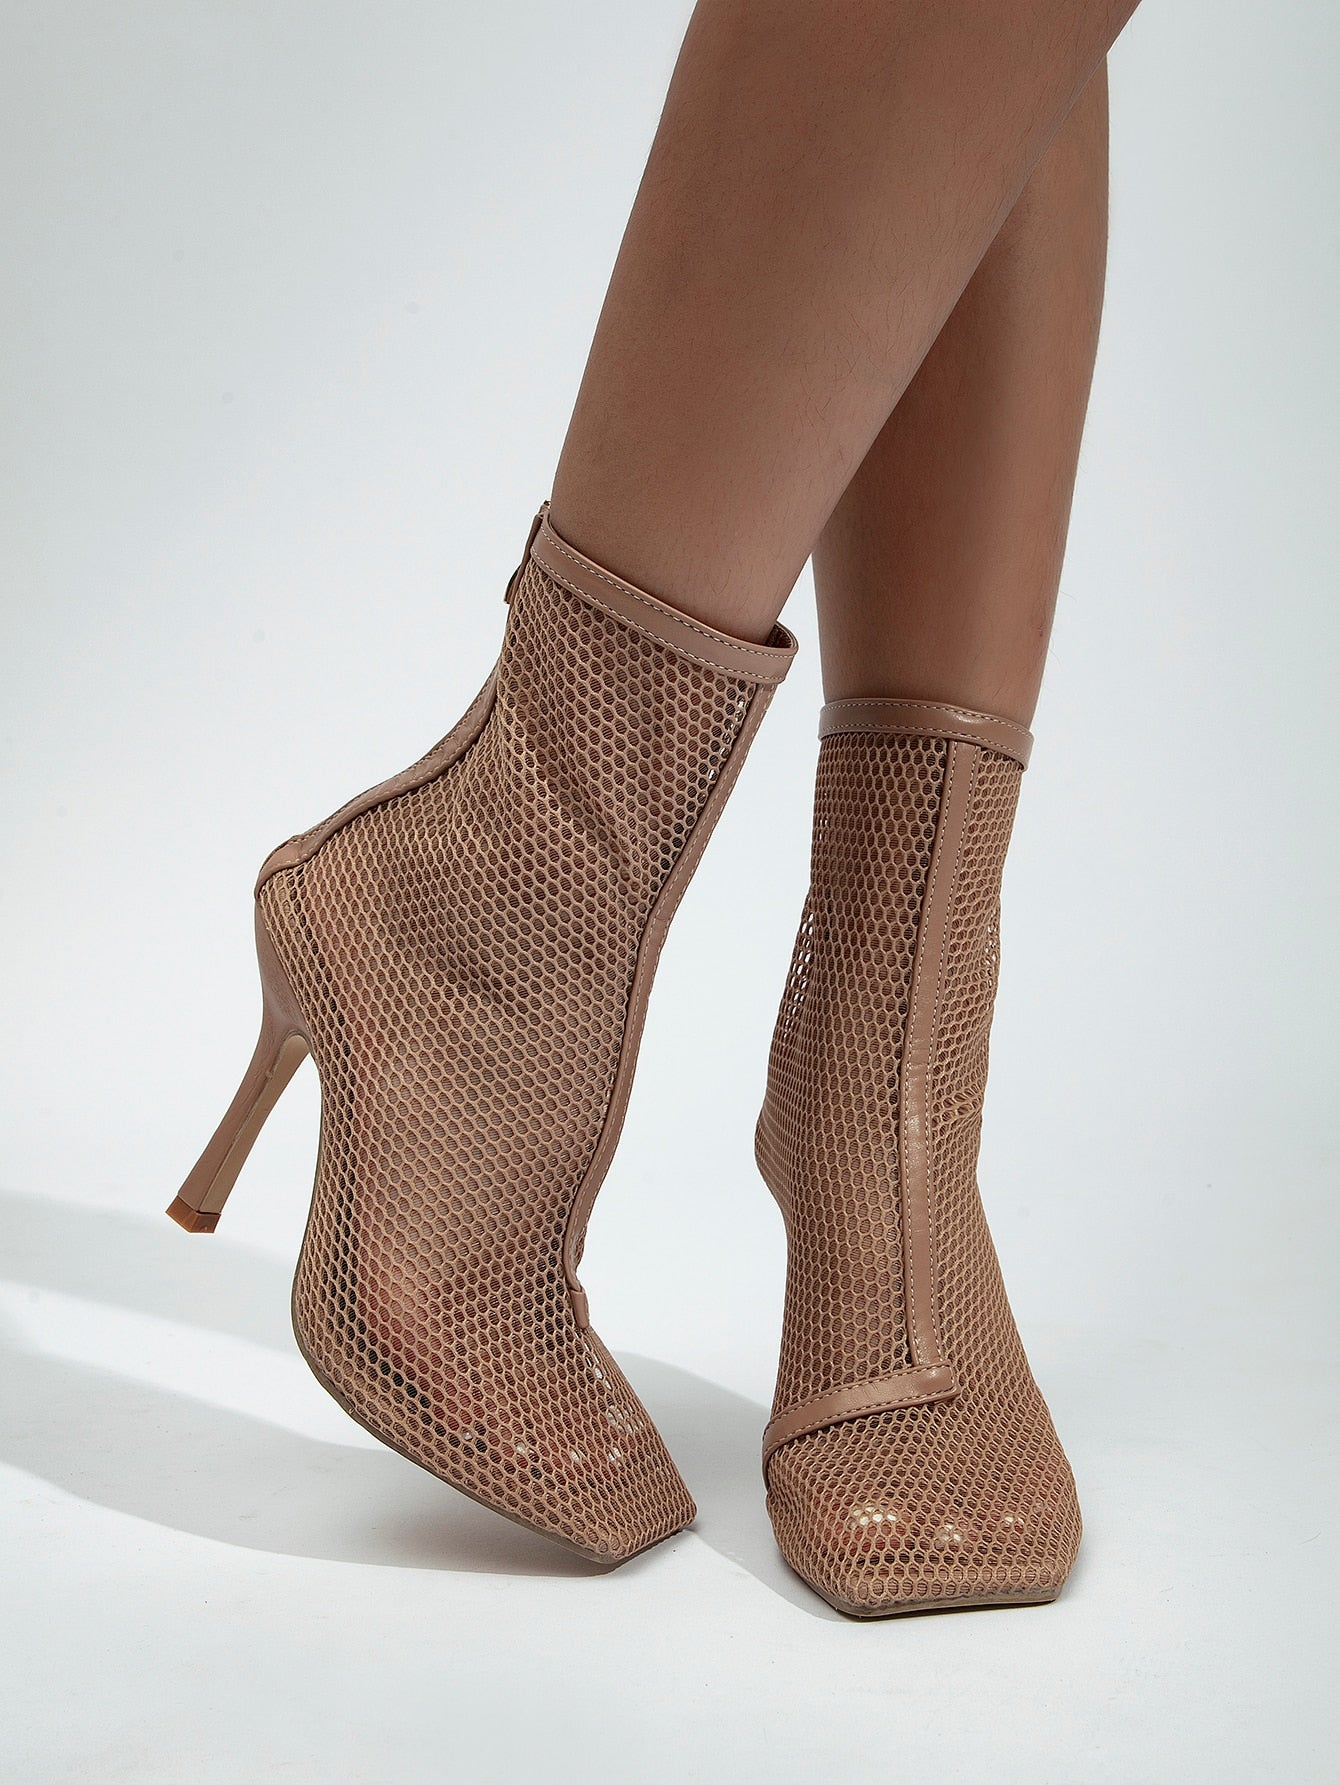 Mesh Netted Square Toe Stiletto Ankle Boots